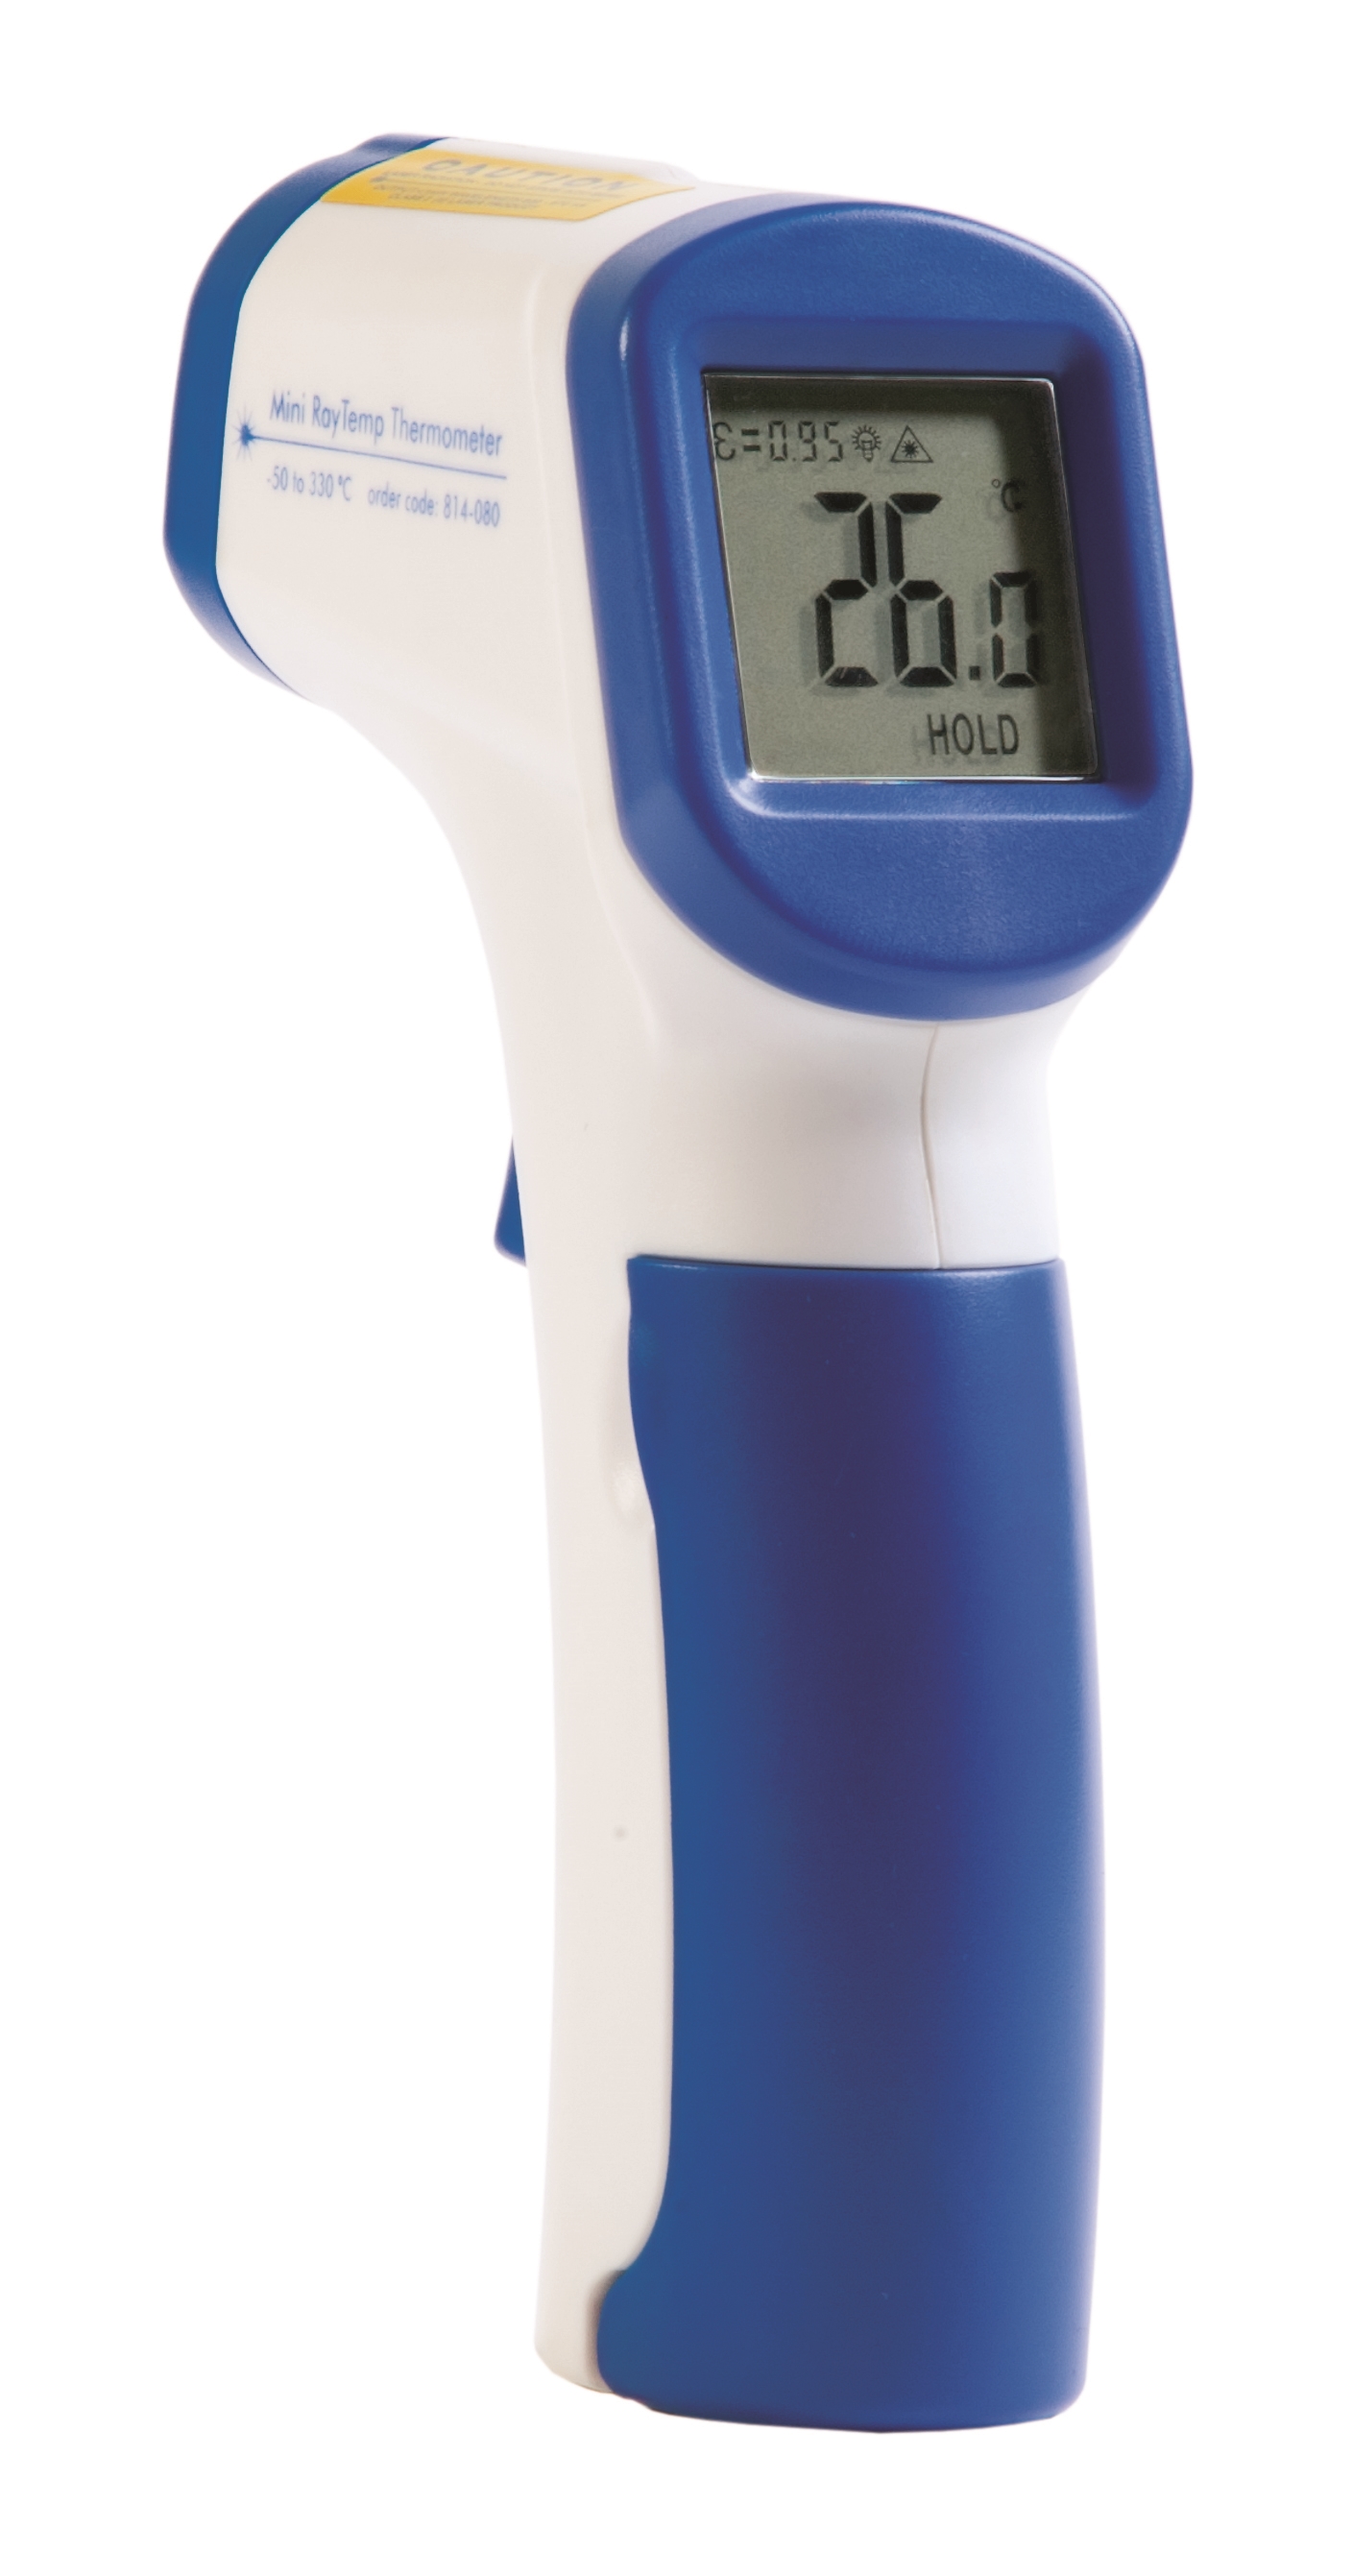 Picture of Mini RayTemp infrarood thermometer 